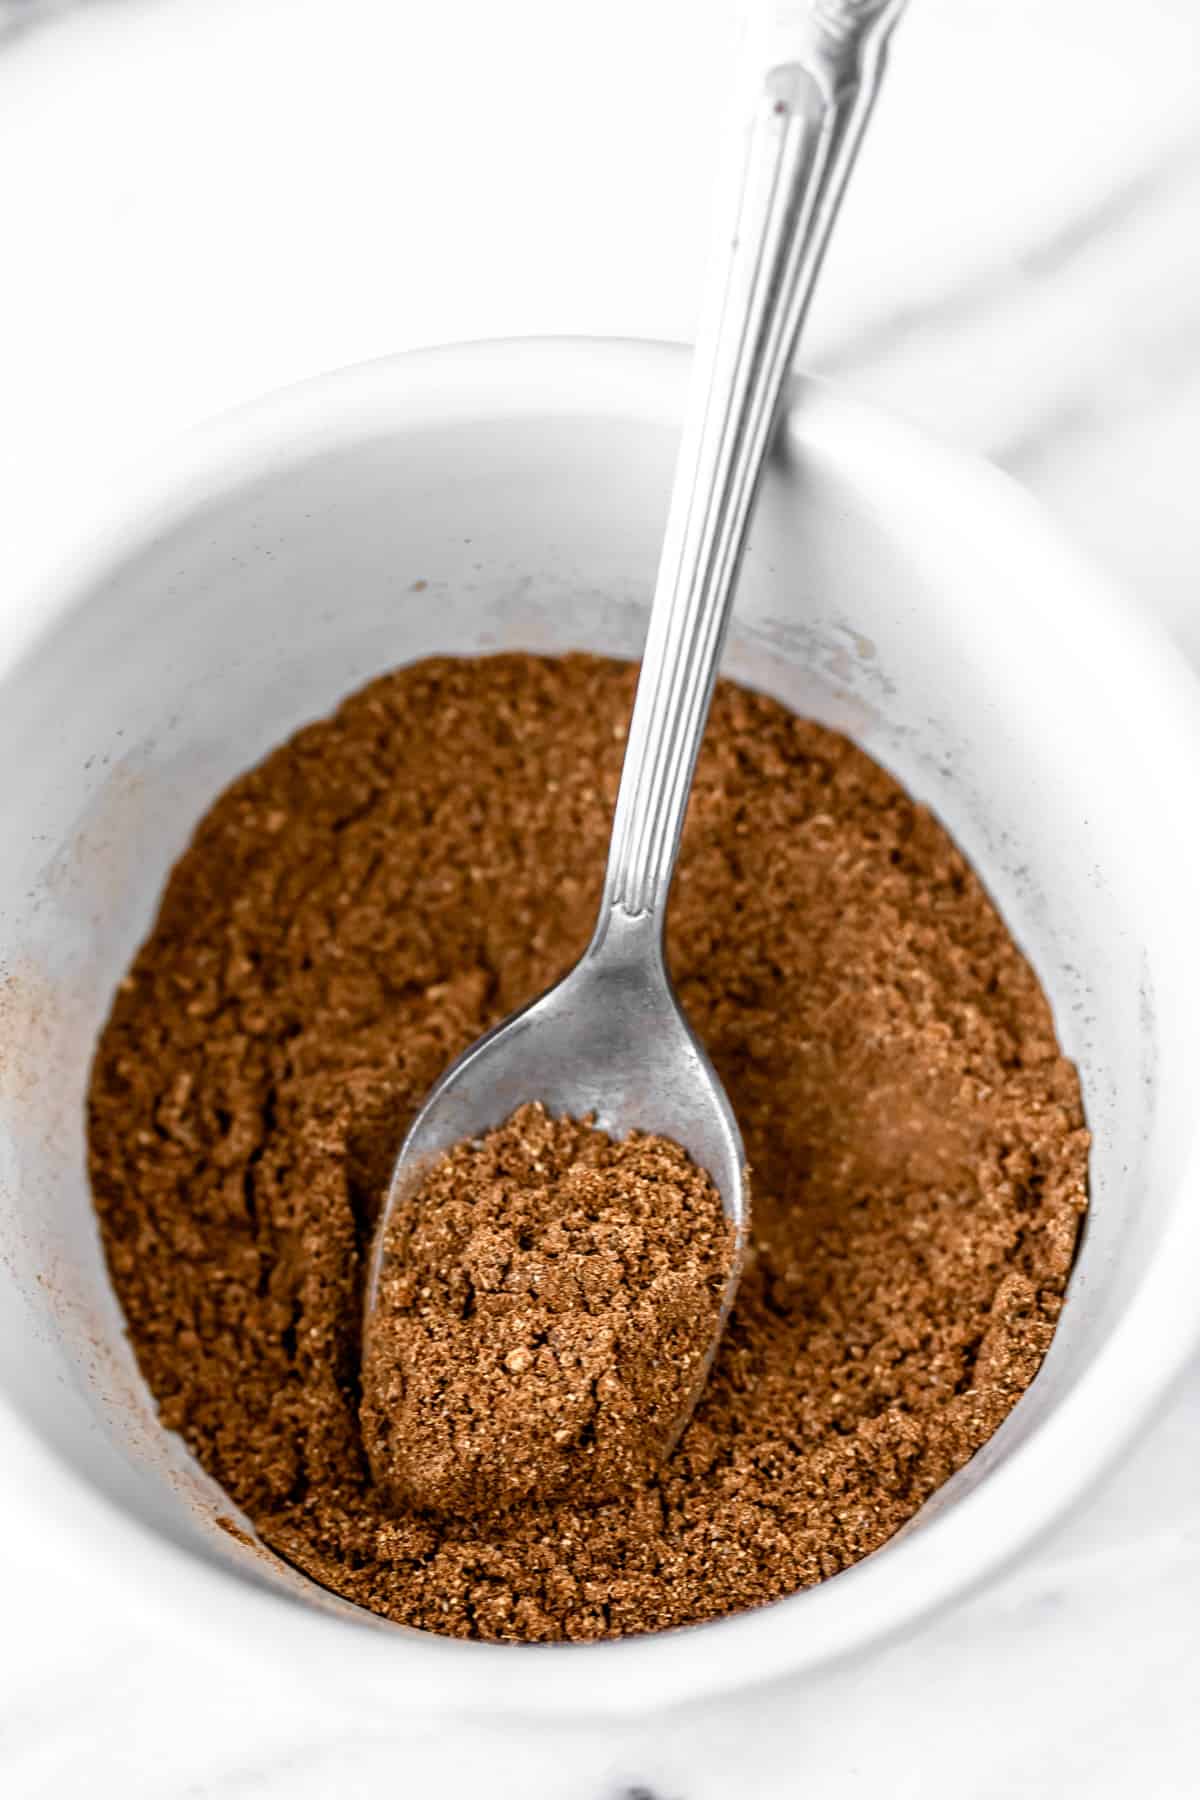 Chai spice mix in a small white bowl with a small silver spoon.